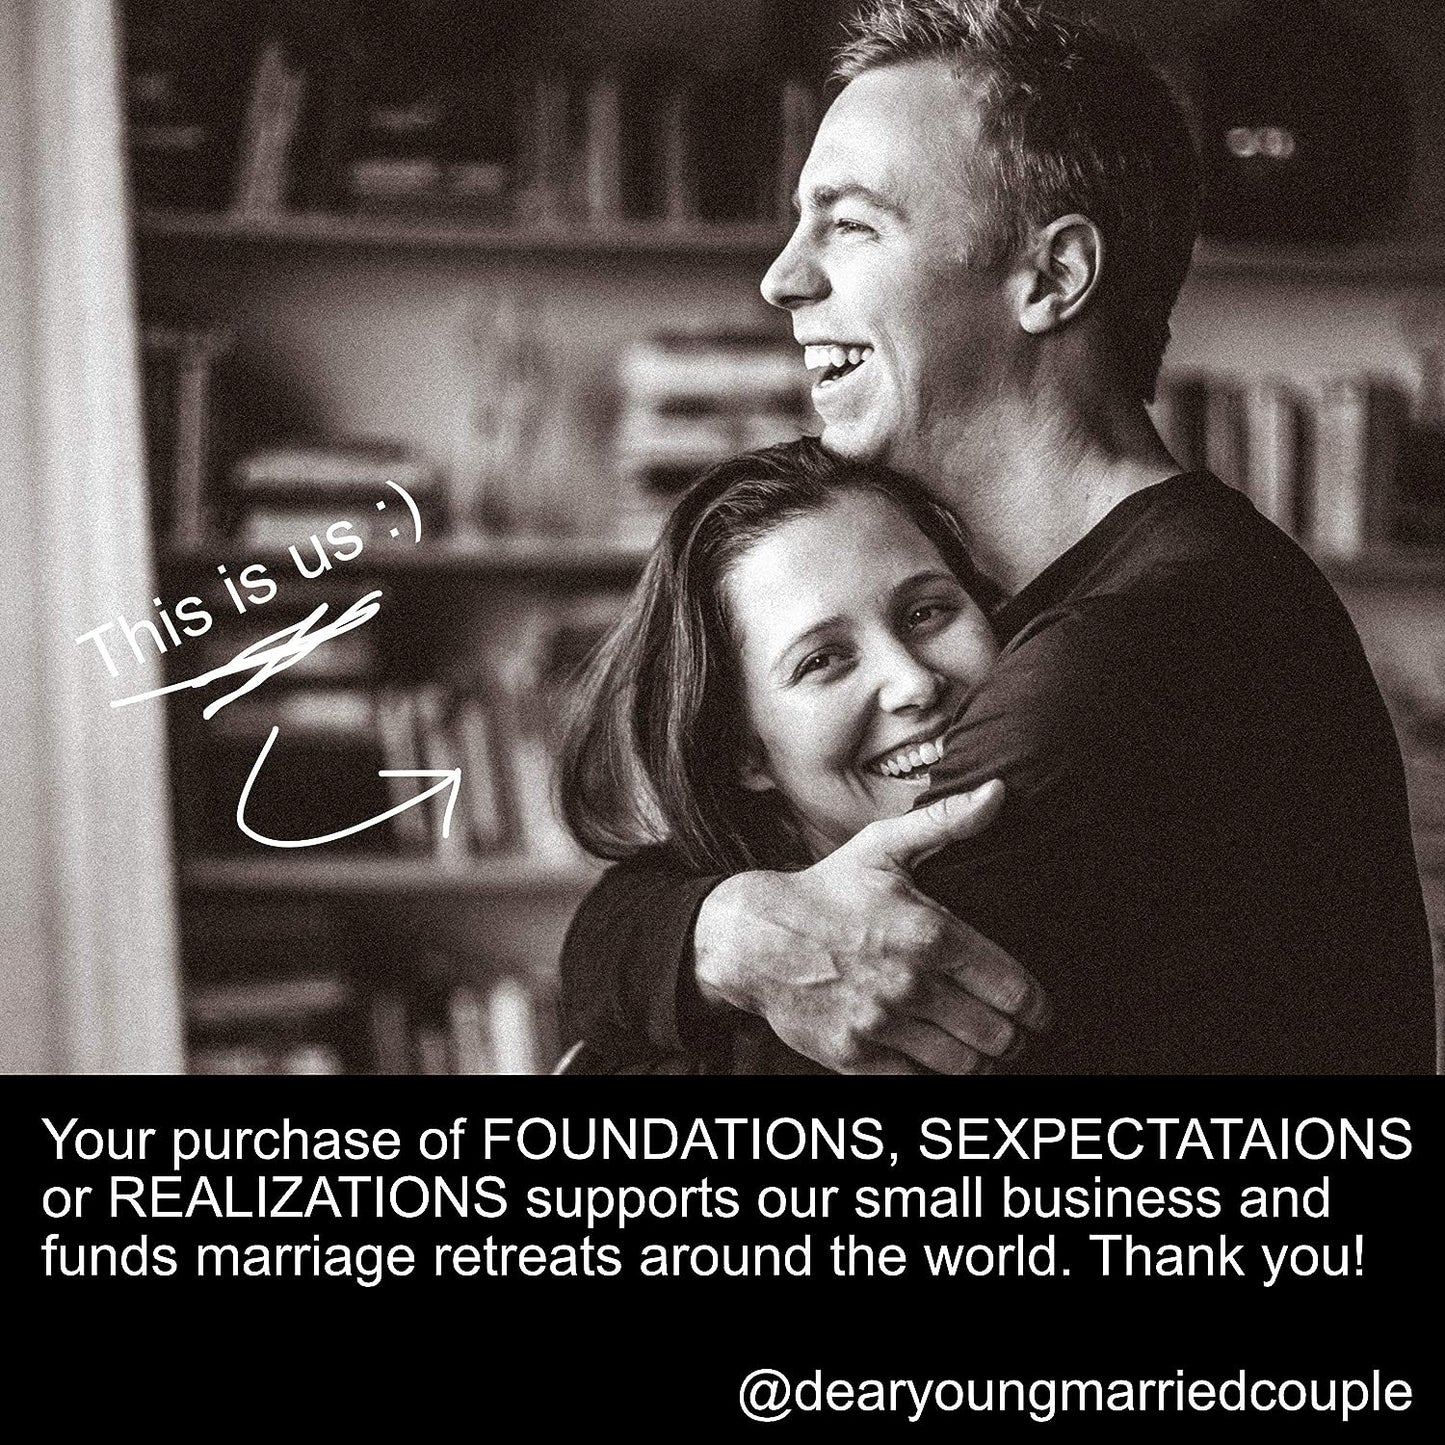 DEAR YOUNG MARRIED COUPLE REALIZATIONS - Card Deck - Fun Game for Couples - 52 Questions to See How Well You Know Your Partner – Dating and Engaged Couples Gift – Conversation Starter